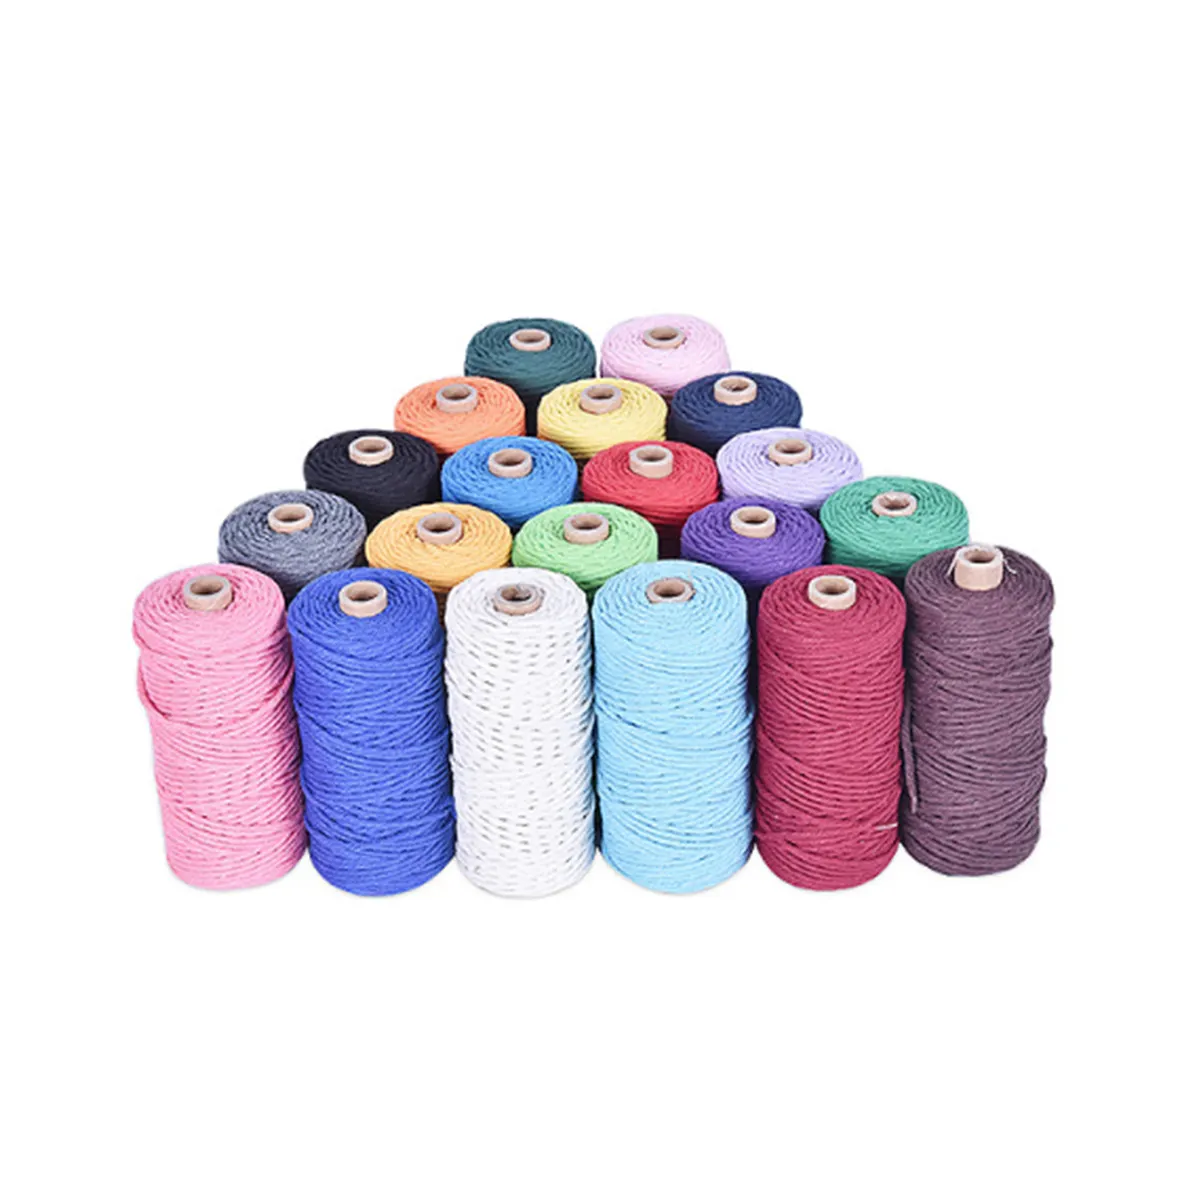 Charmkey wholesale stock color 100 meter roll 3mm macrame cord recycled cotton rope yarn for handmade textile cheap price